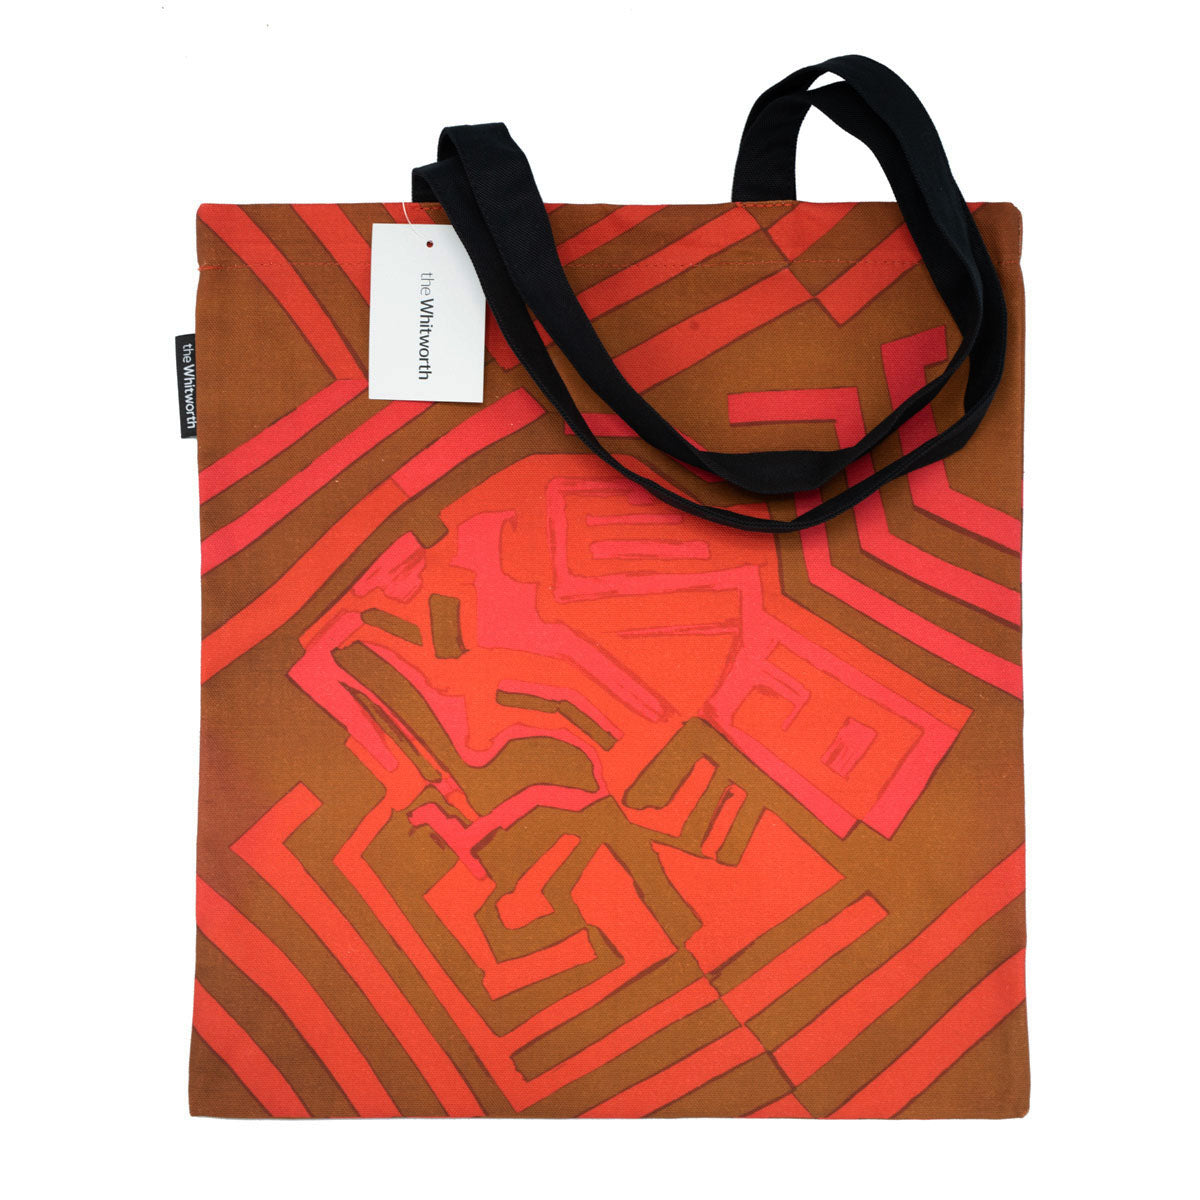 Red tote bag with a black handle featuring a red and pink design by Shirley Craven.